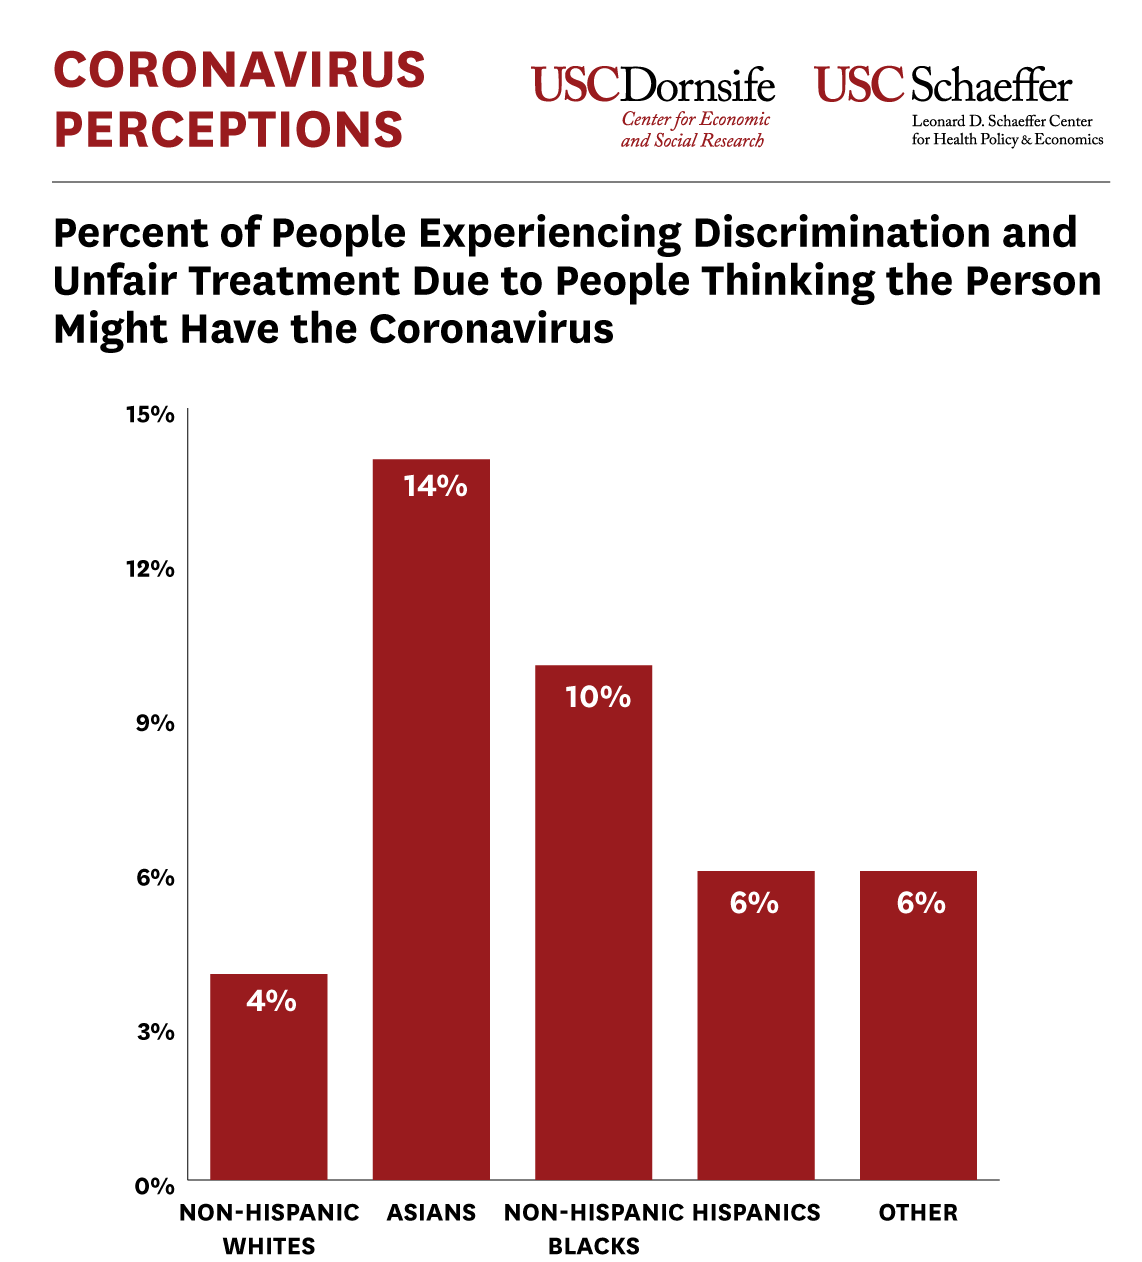 Percent of People Experiencing Discrimination Due to People Thinking the Person Might Have the Coronavirus